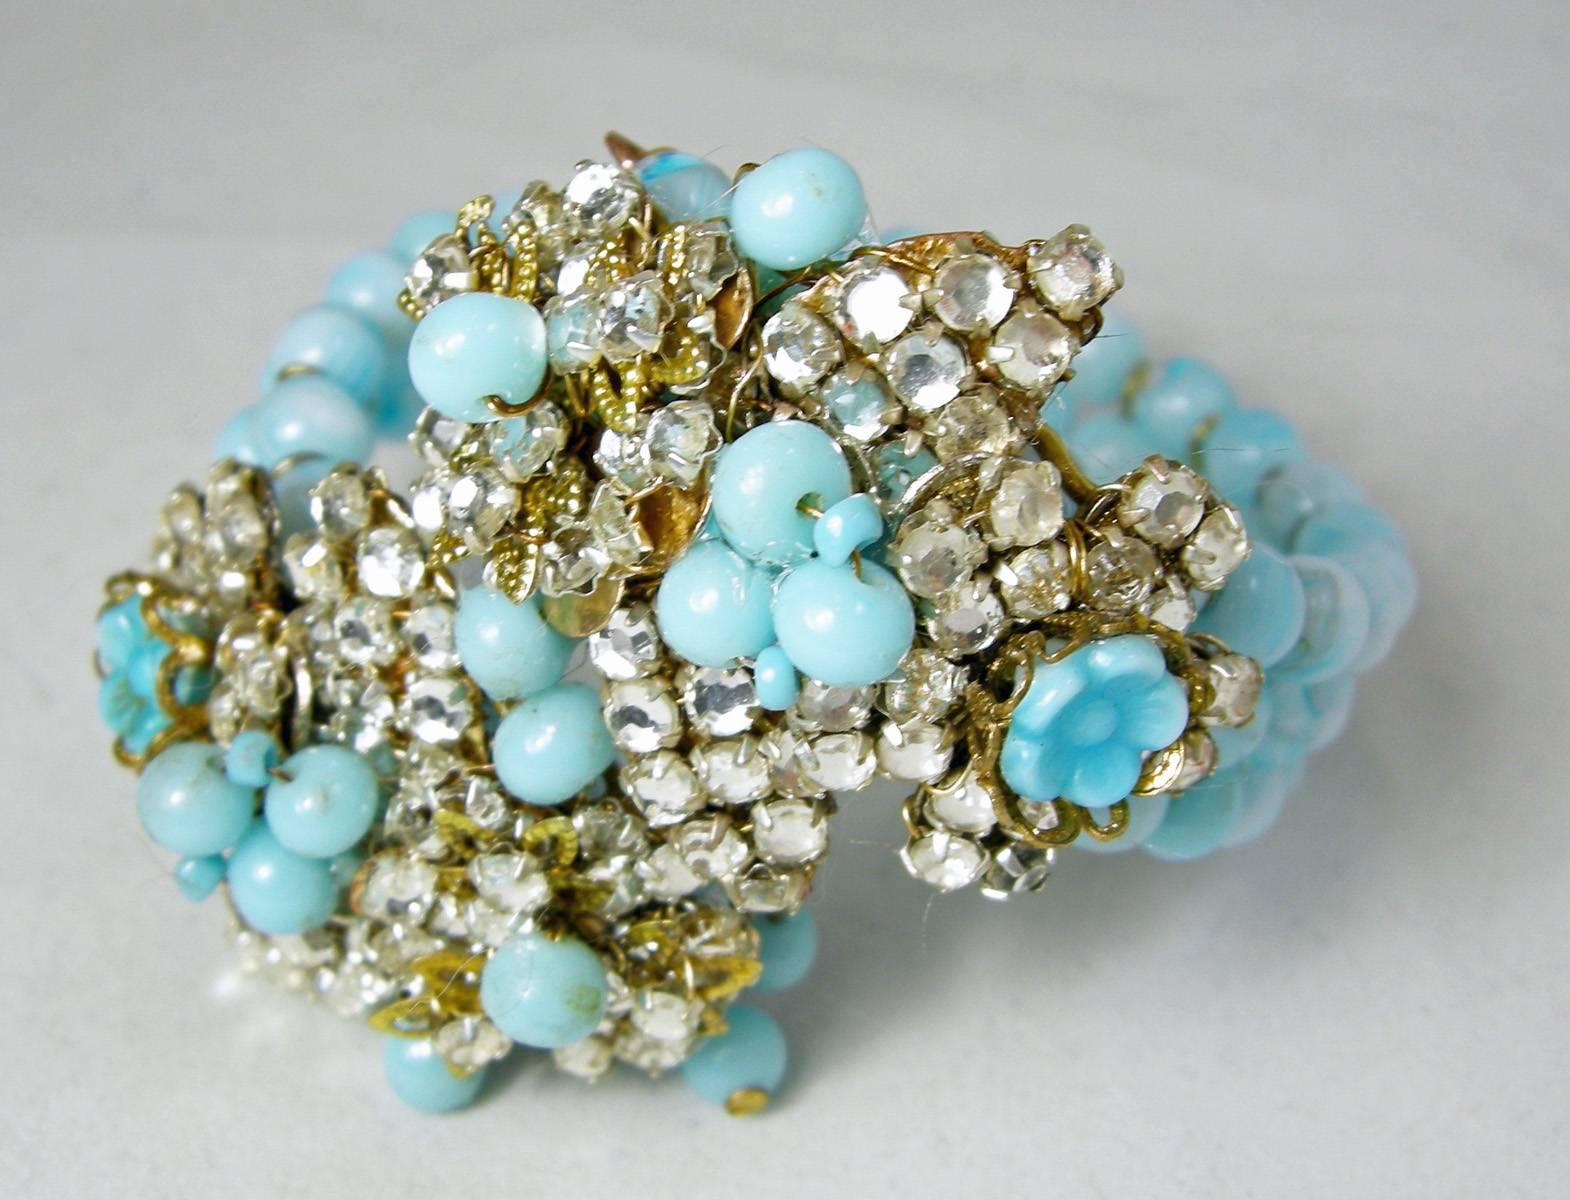 This rare vintage Miriam Haskell wrap around bracelet is from the late 1930s before she signed her jewelry.  It has 3 rows sky blue glass going leading to a floral centerpiece on both sides.  Blue glass flowers embedded in gold tone settings